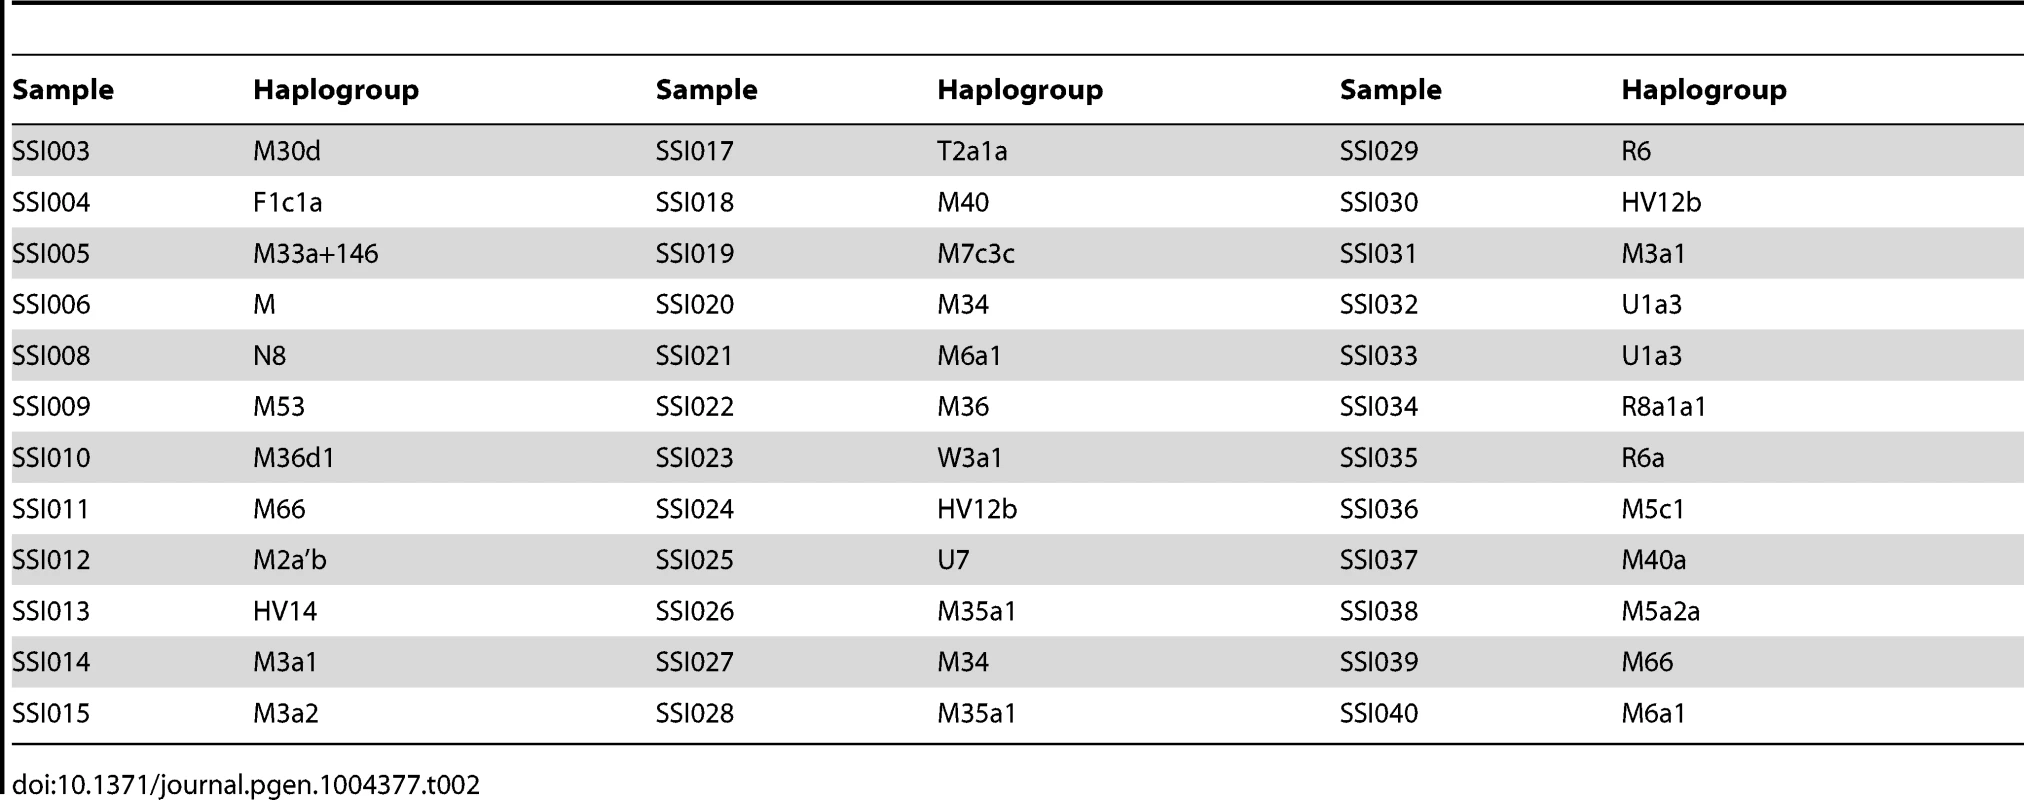 Mitochondria haplogroup assignment for the 36 SSIP samples.